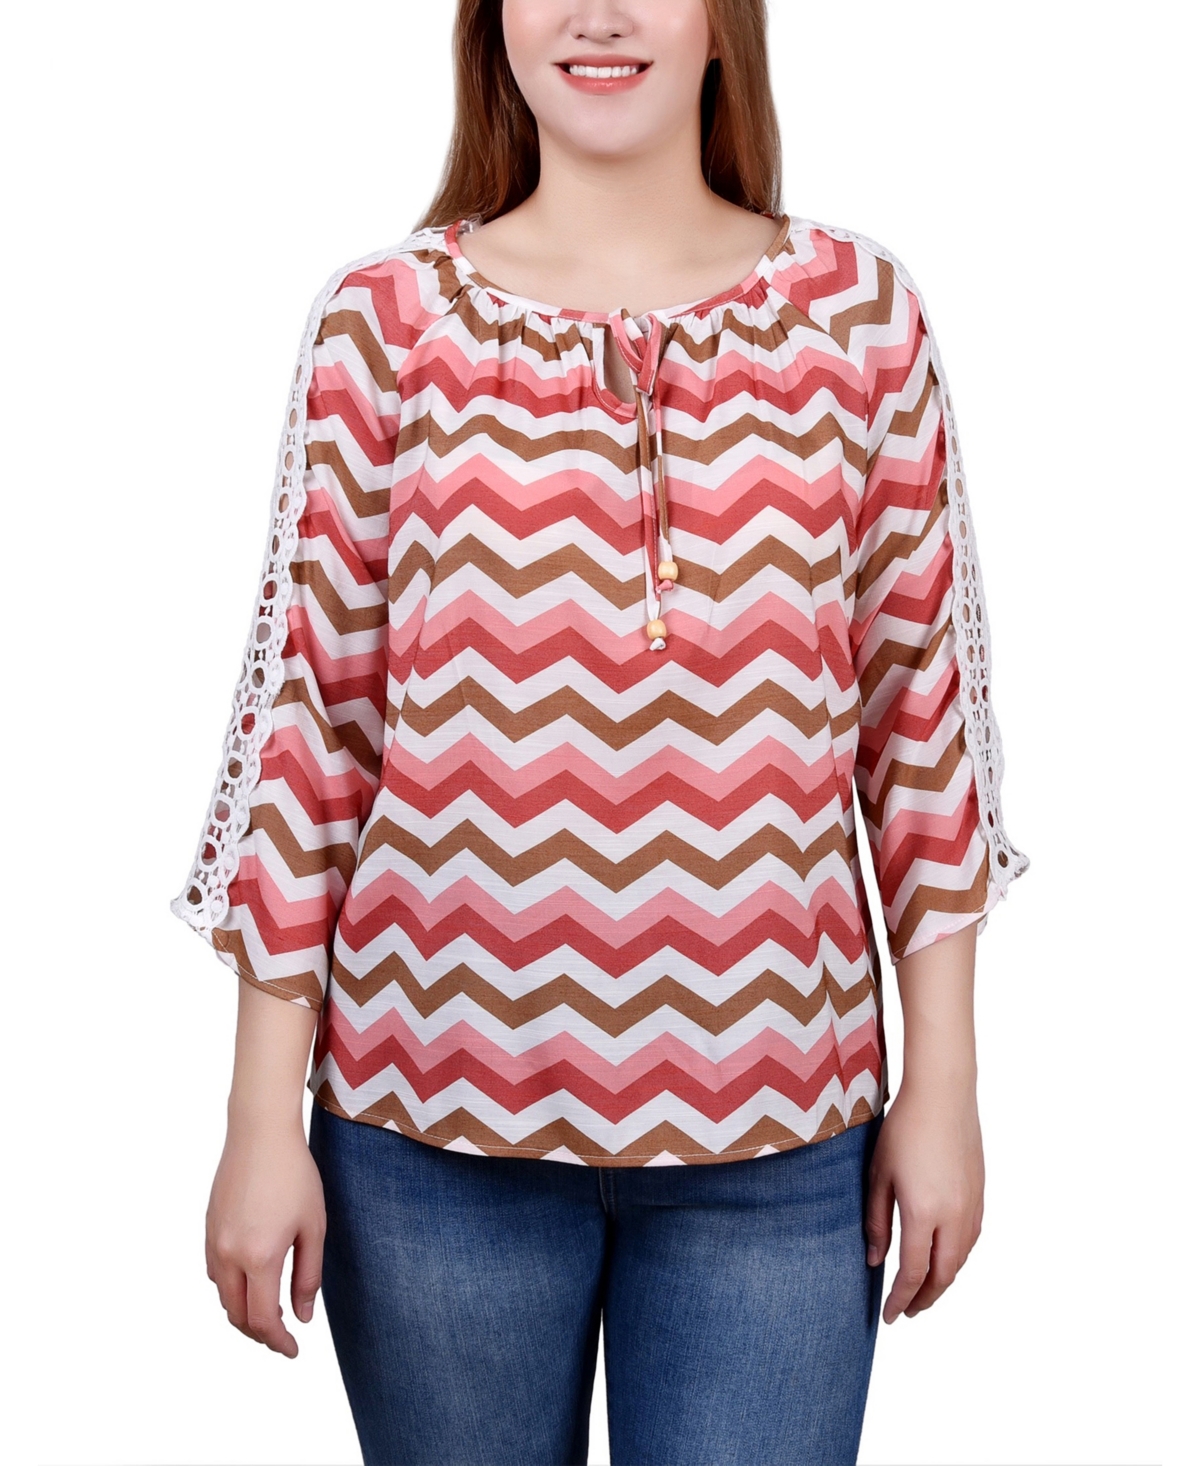 Petite 3/4 Sleeve Tunic with Crochet and Tie Neck - Pink Wht Chevron